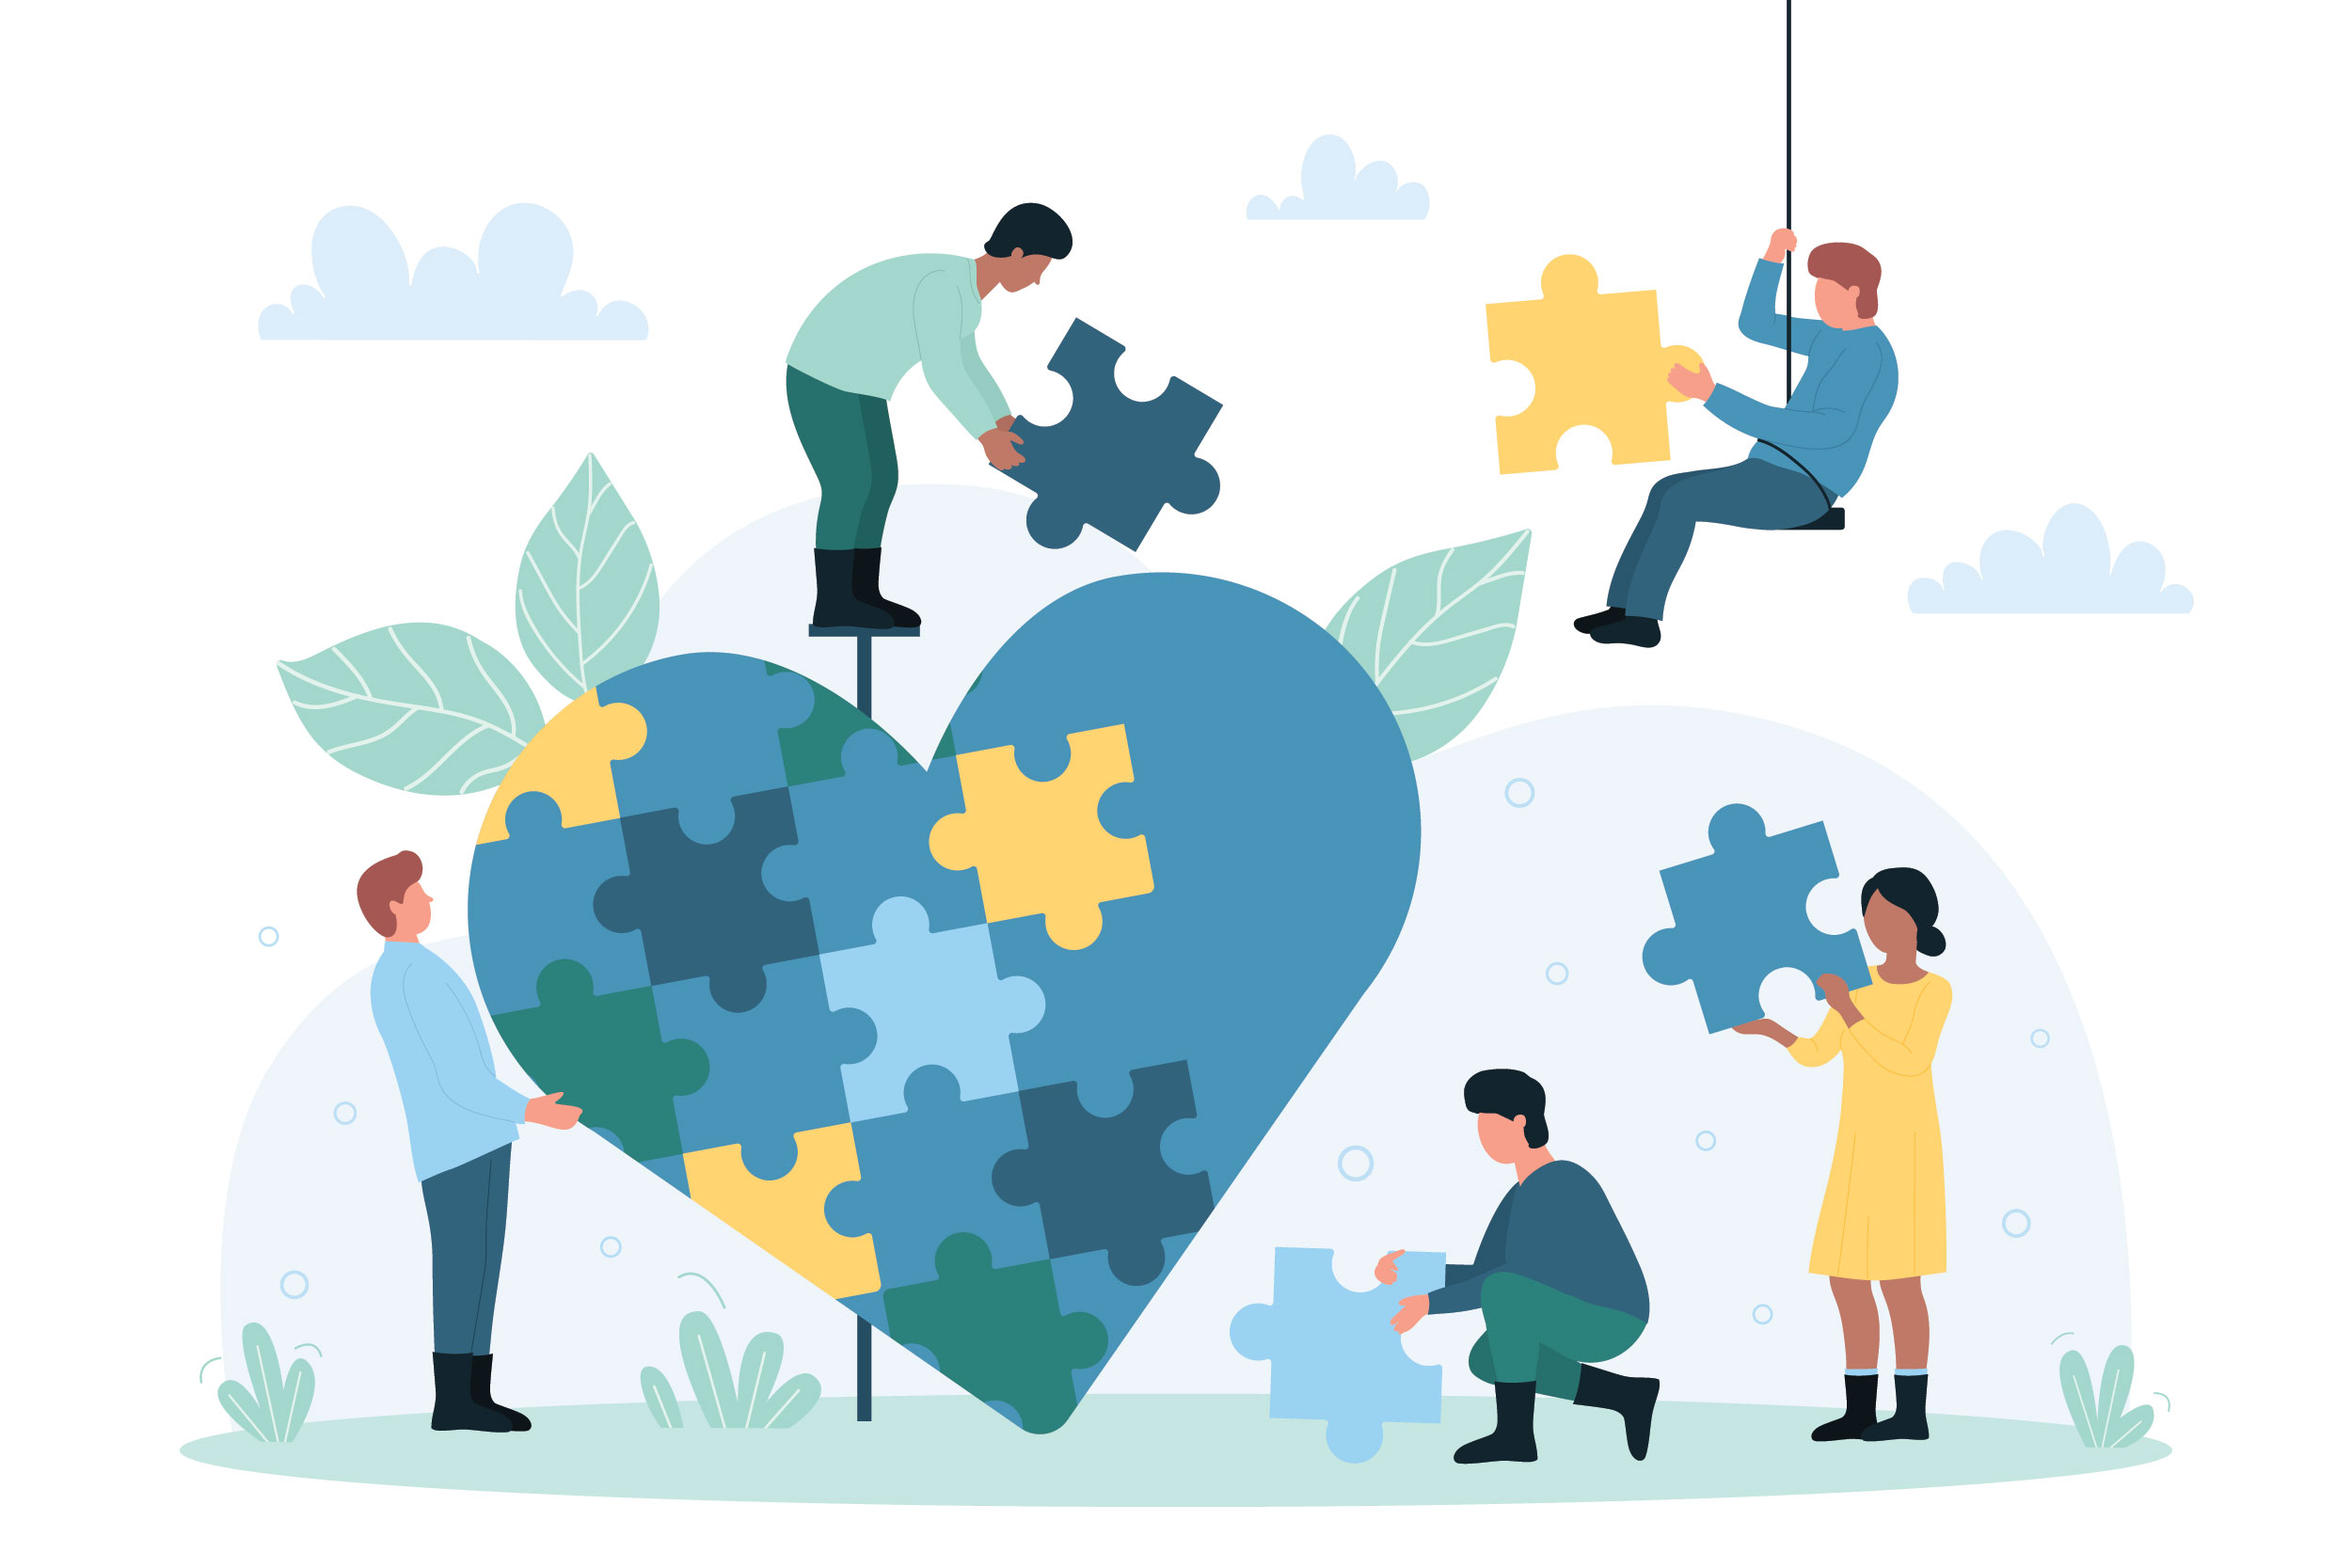 An illustration of people putting together a heart using puzzle pieces. In blues and greens and yellow.